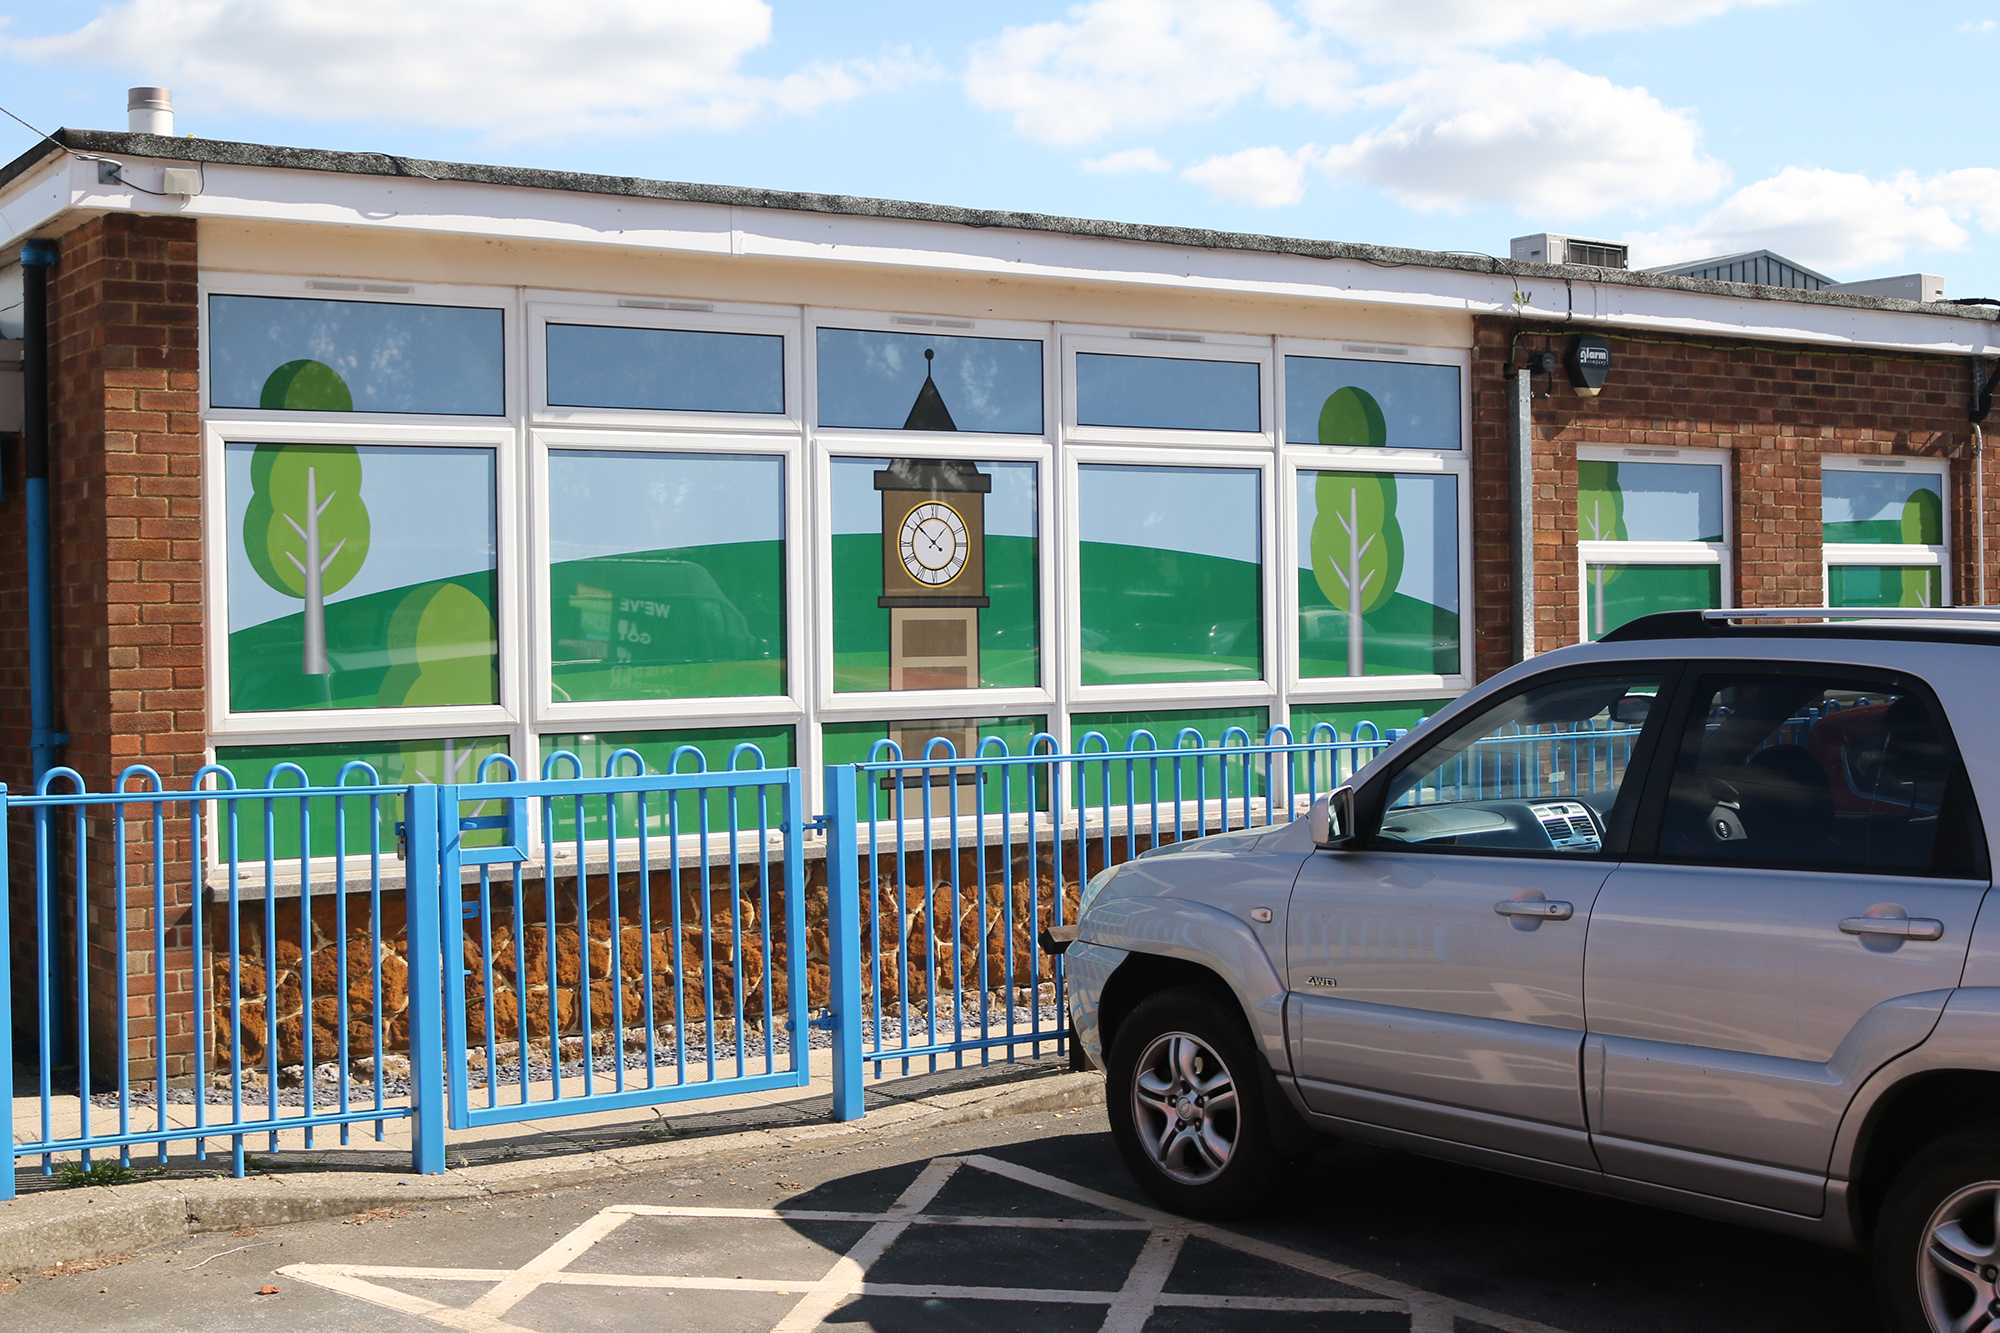 Glass wall art for schools